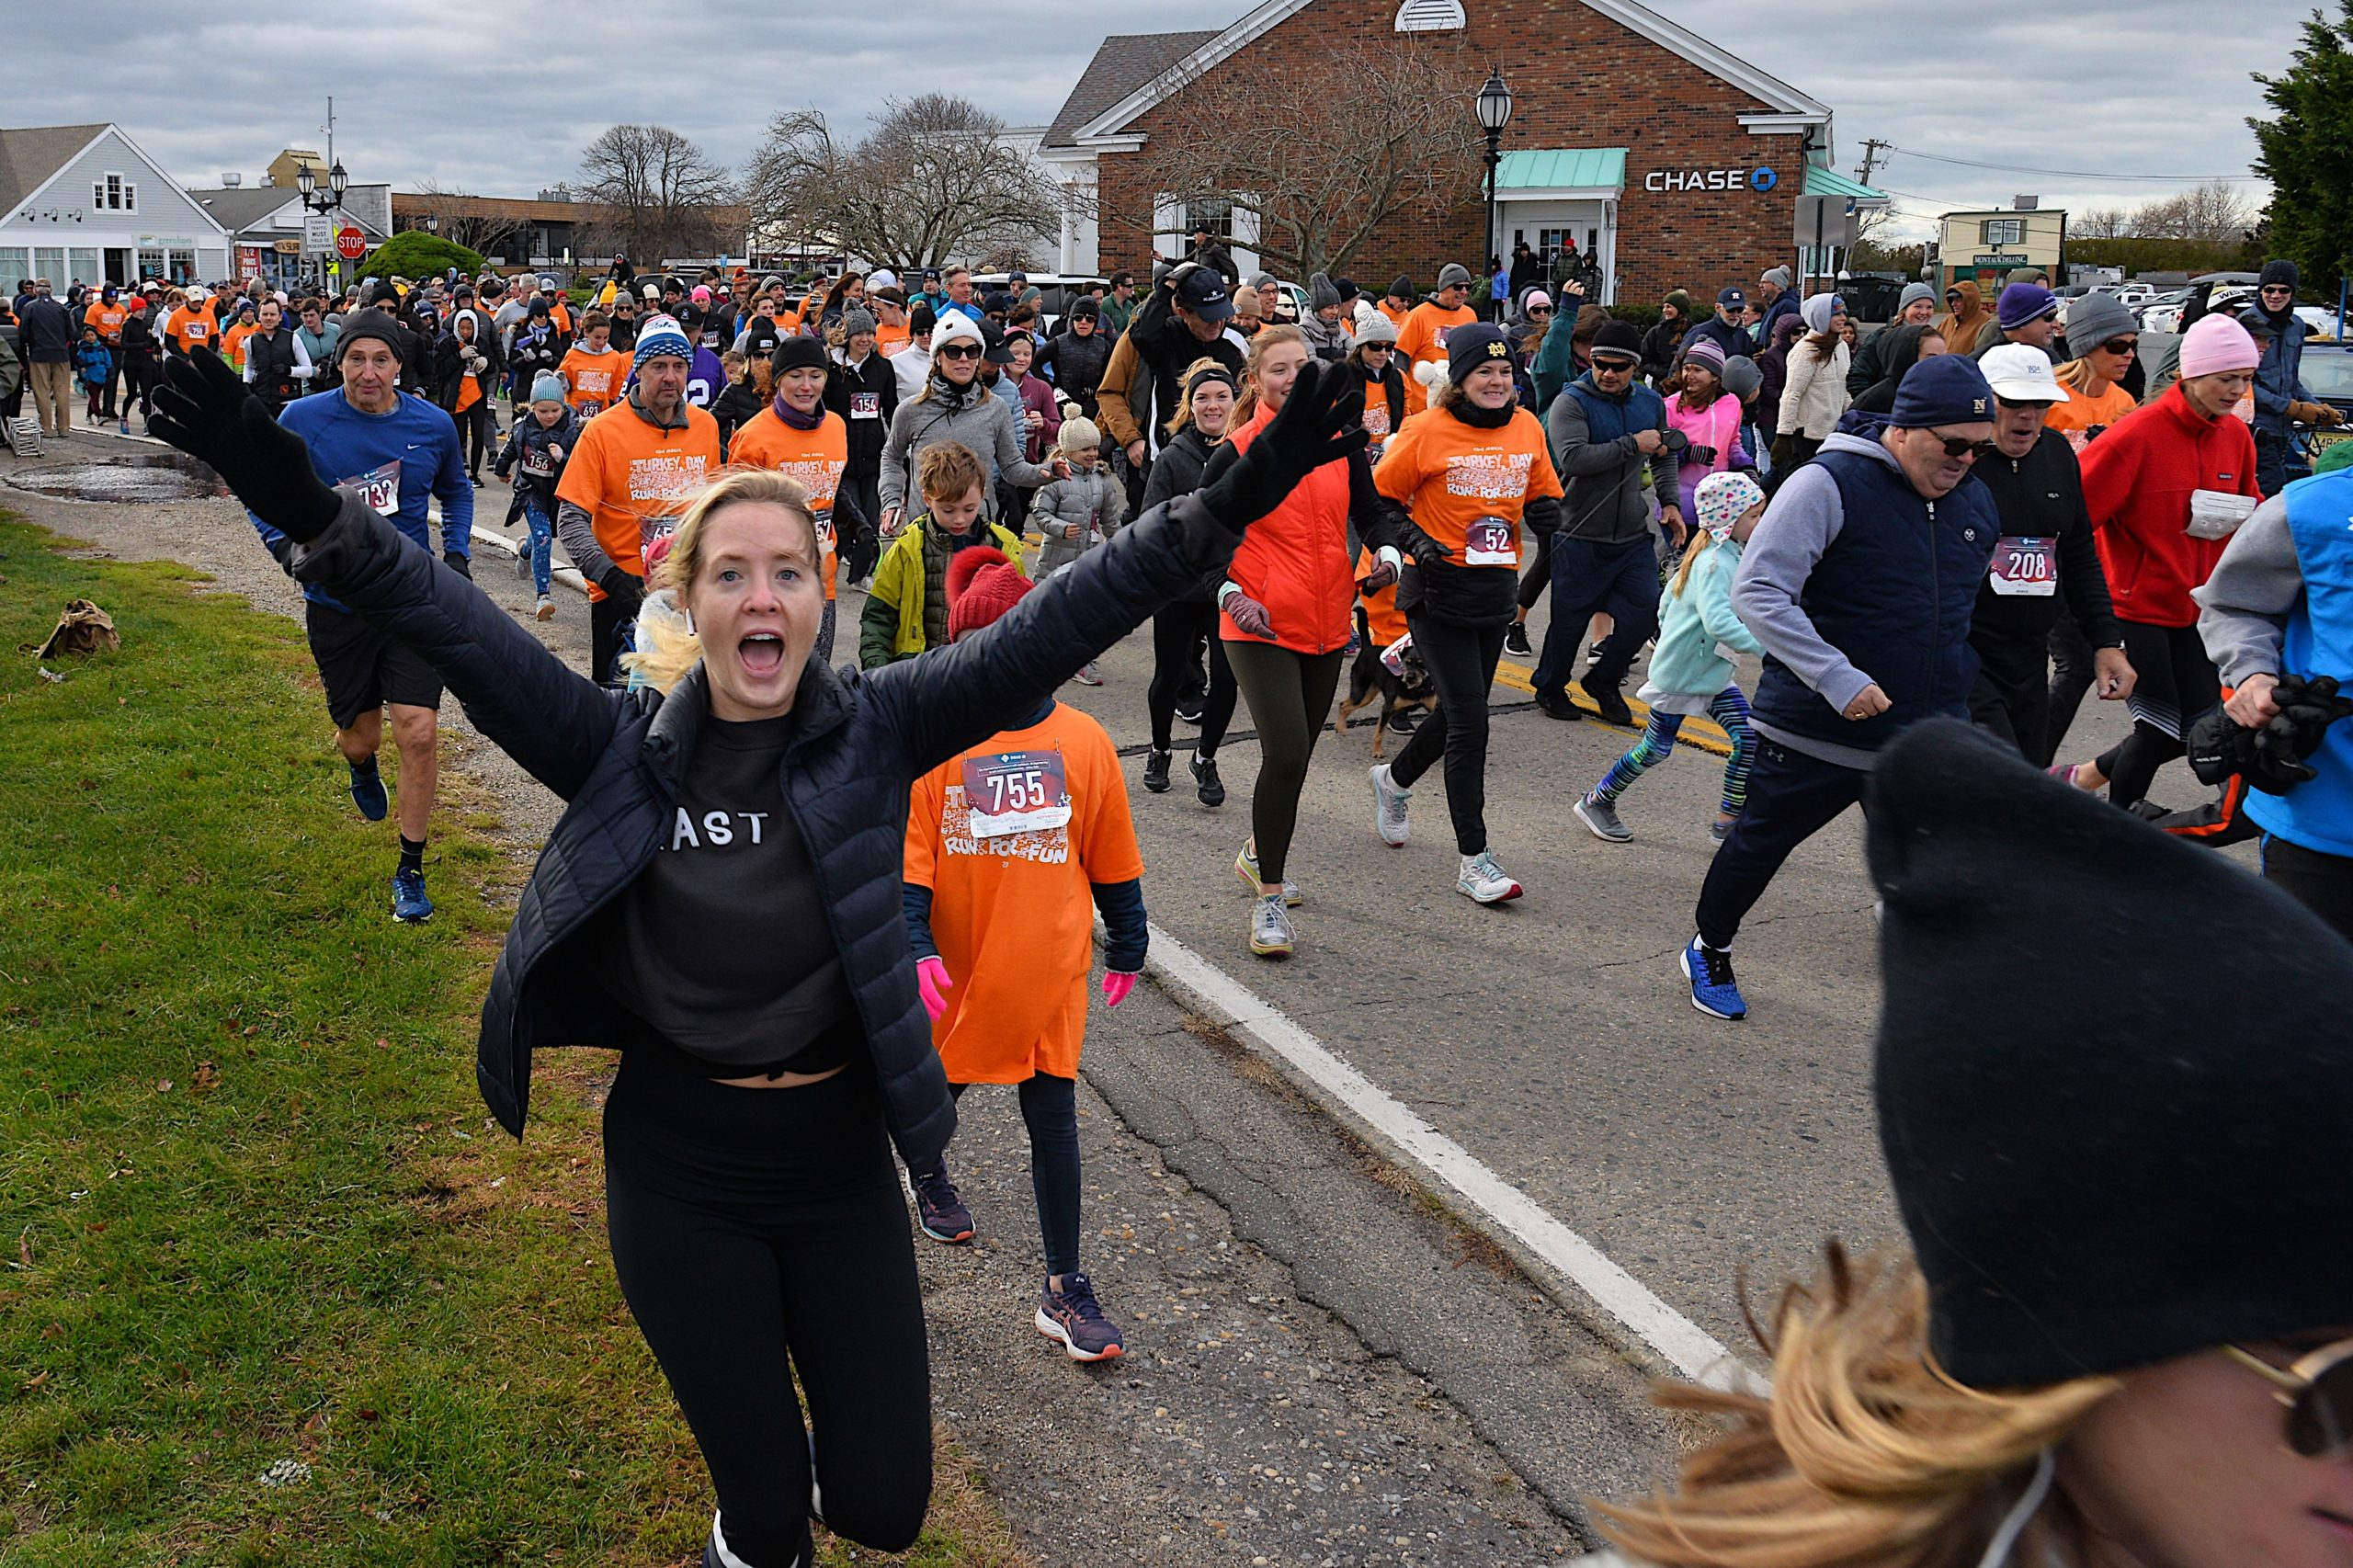 The annual Thanksgiving Day tradition continued in Montauk with the Turkey Trot around Fort Pond. KYRIL BROMLEY